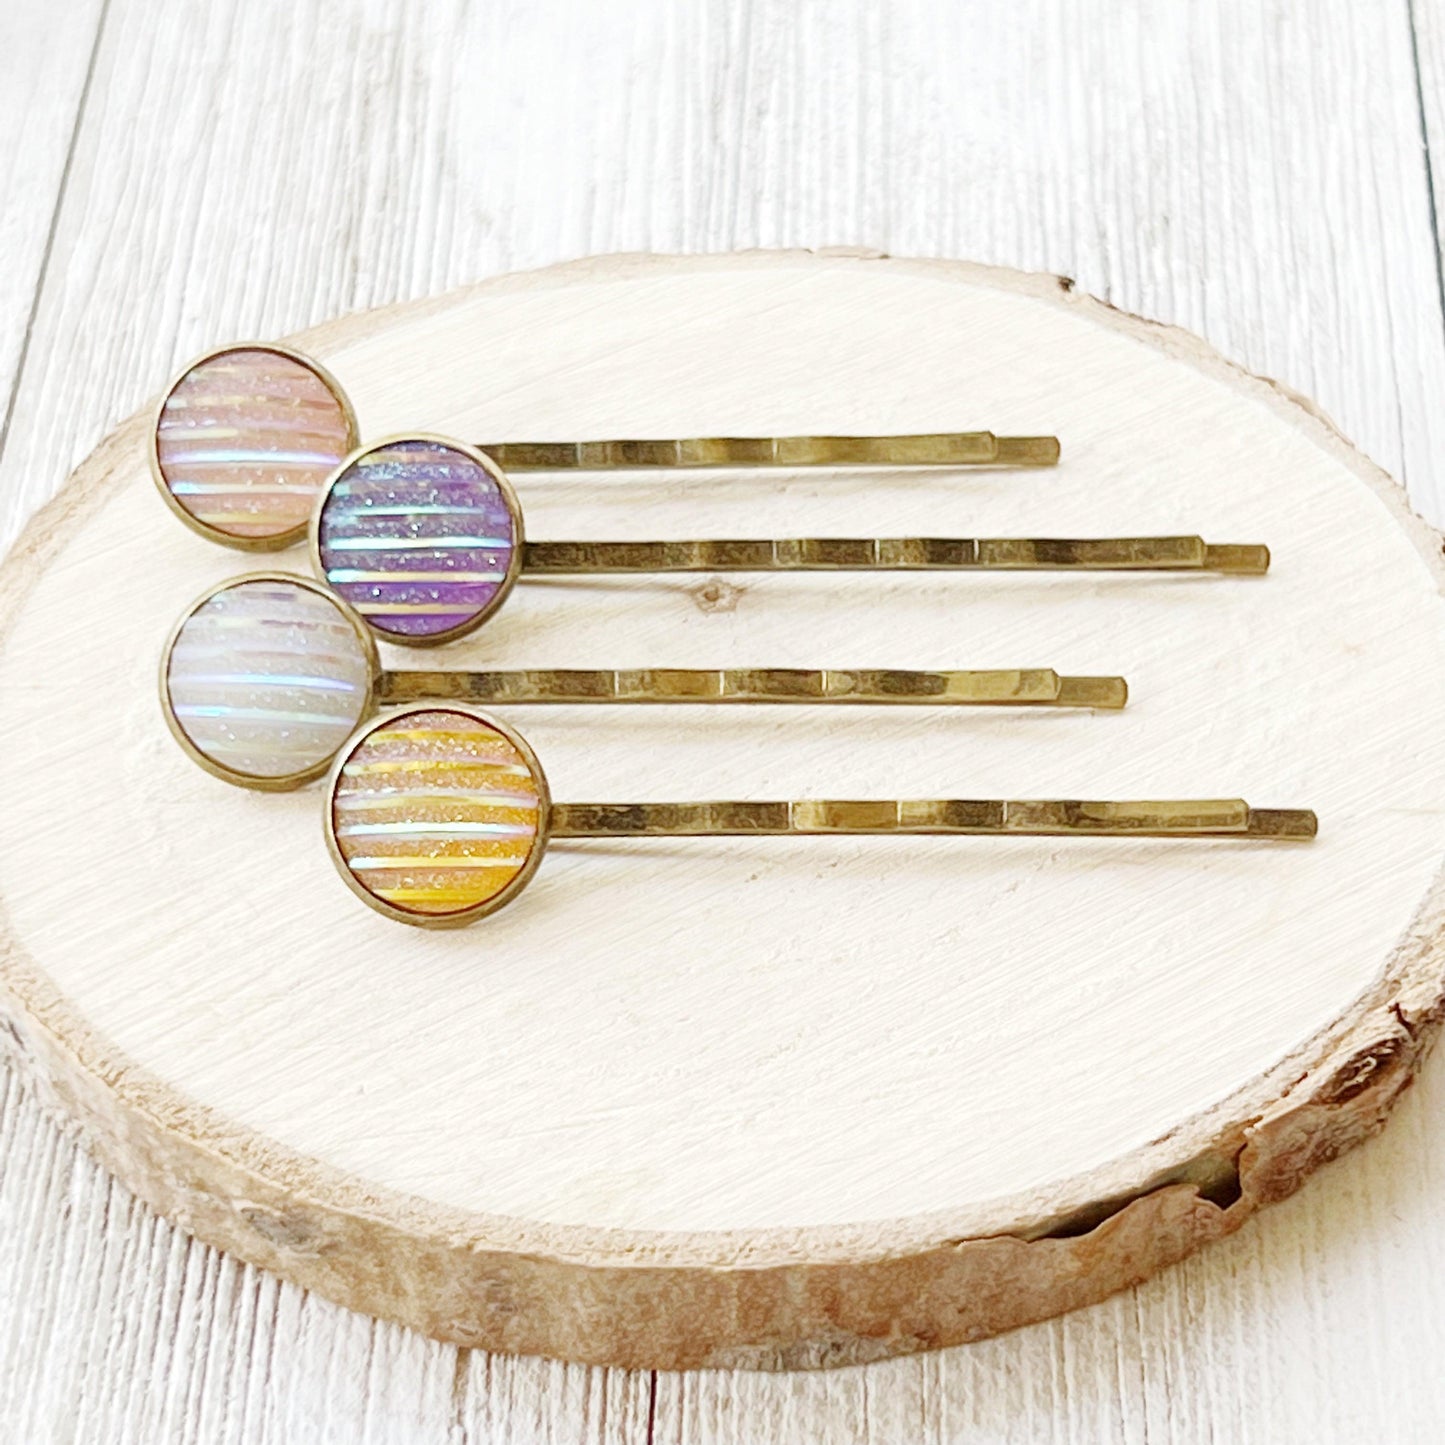 Set of 4 Brass-Toned Hair Pins: Vibrant Accents in Purple, Yellow, Pink, and White Striped Glitter Design